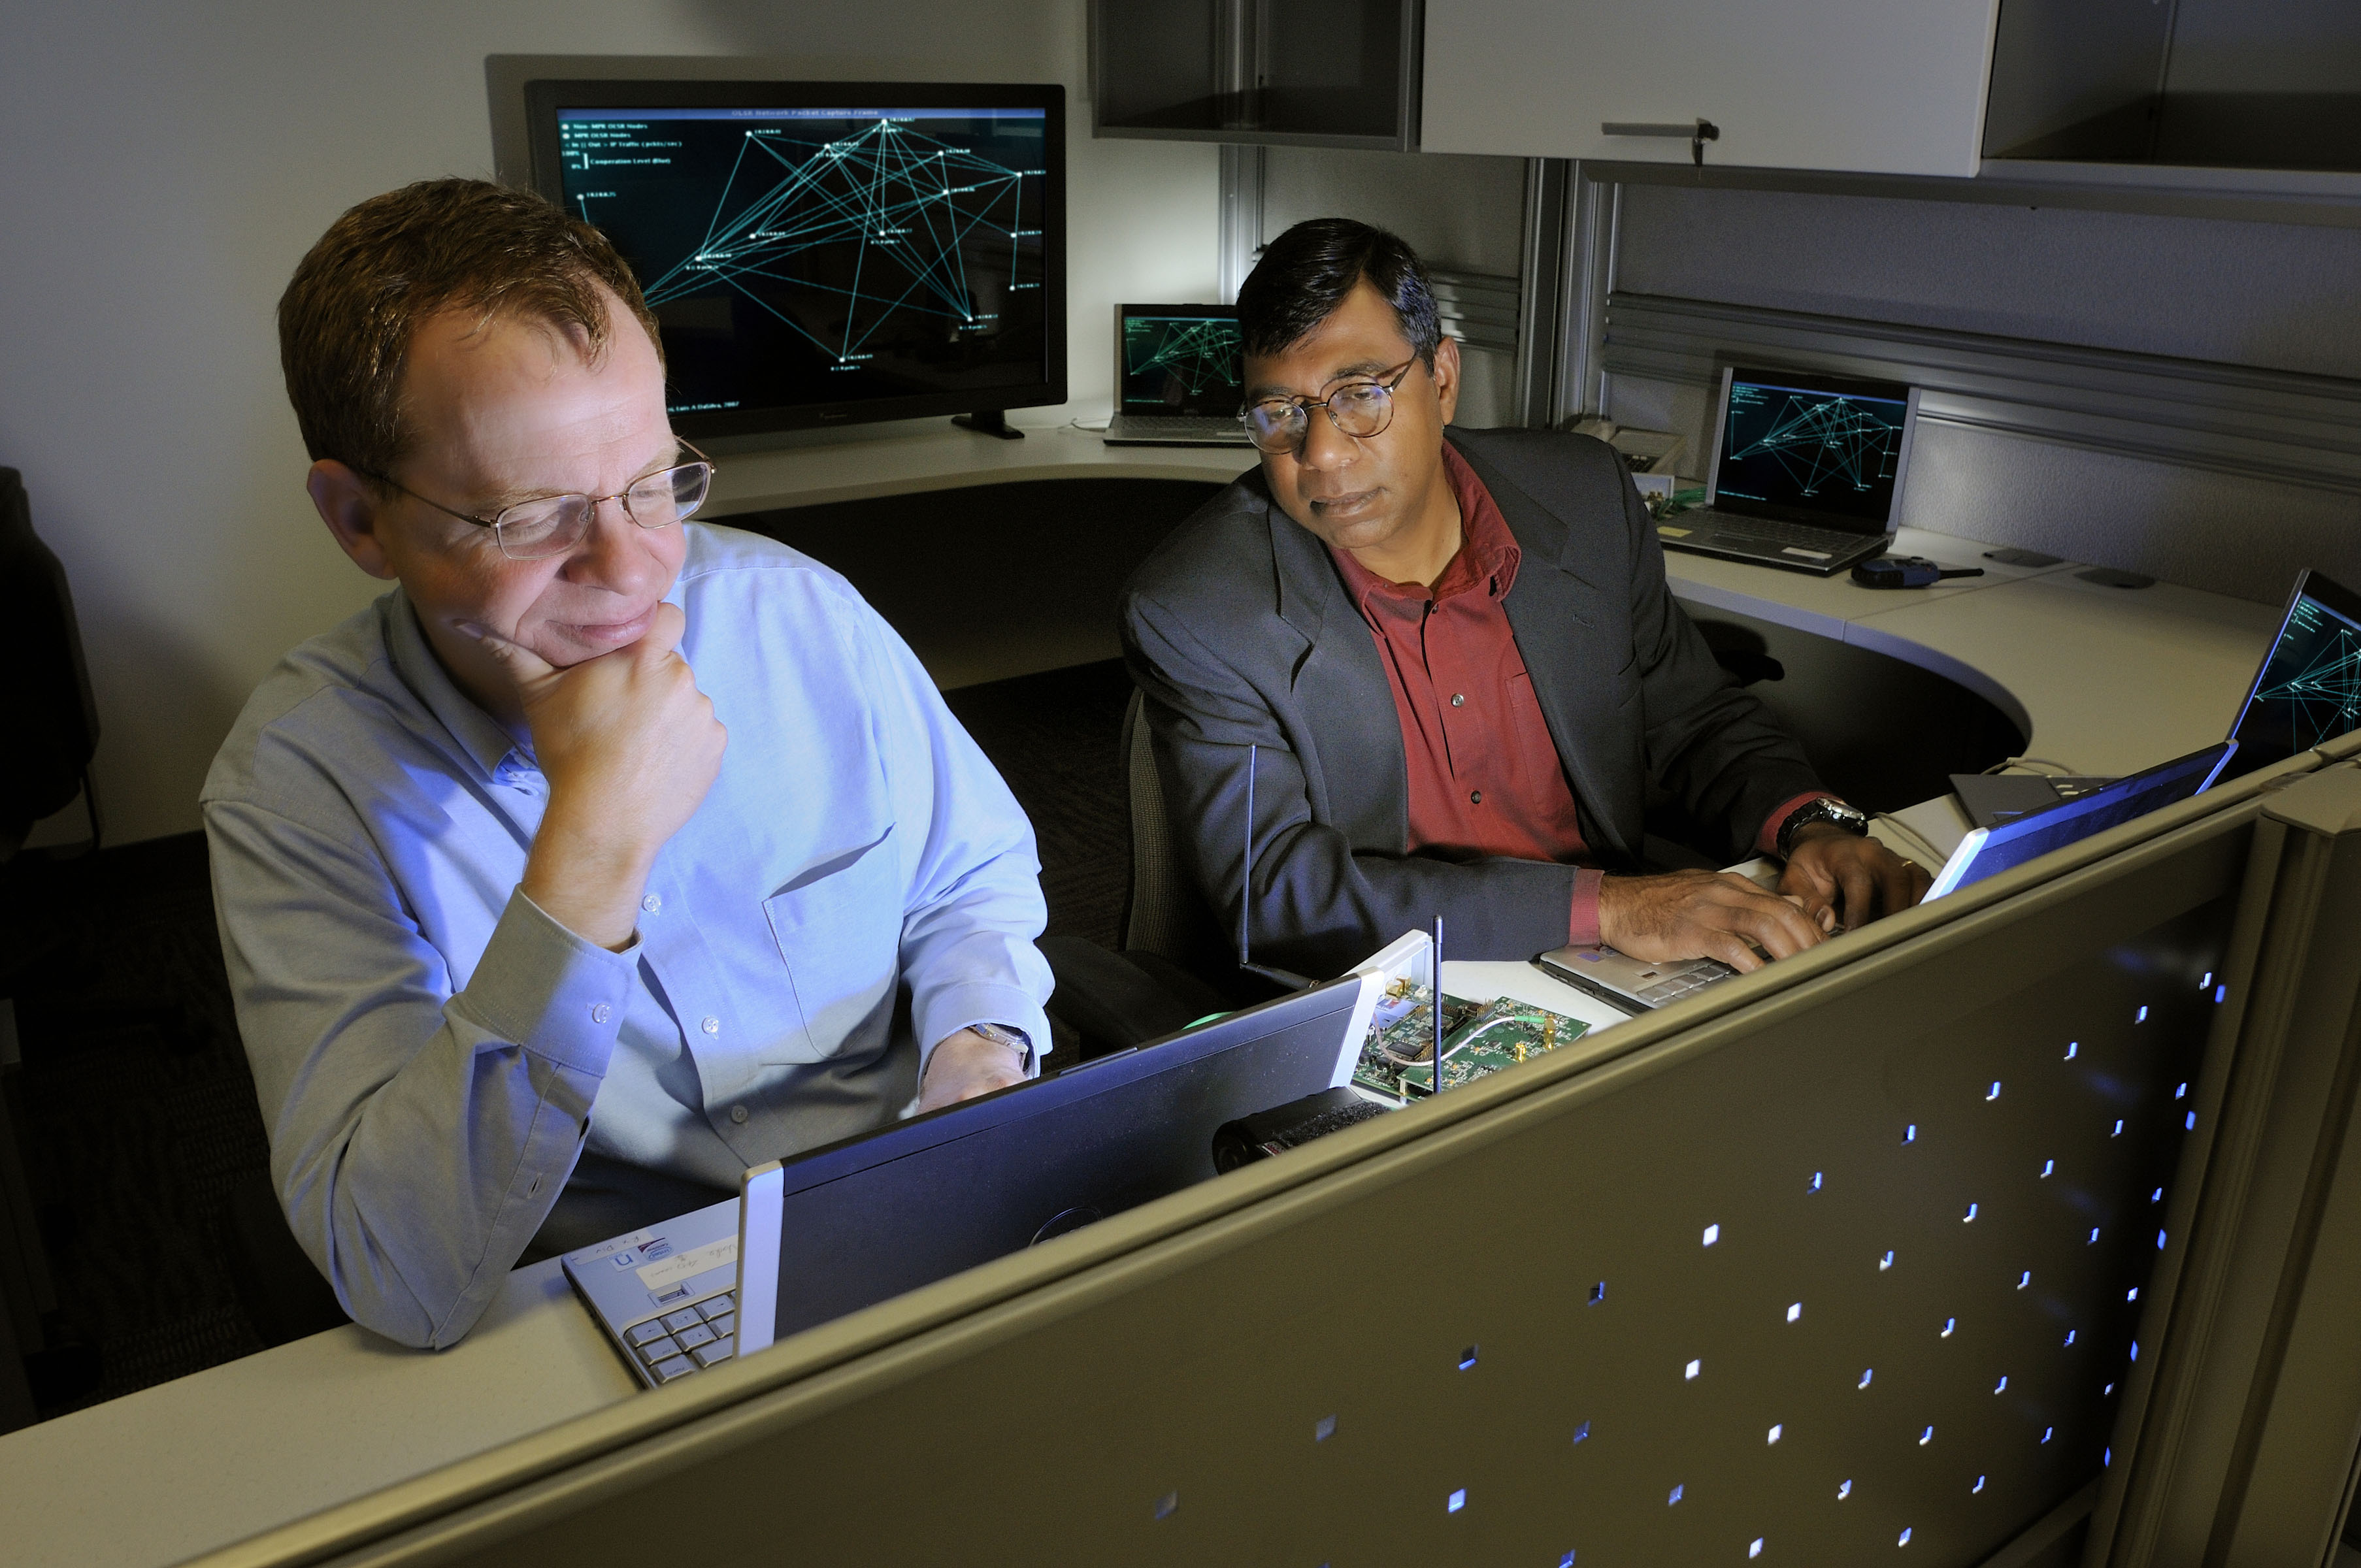 Jeff Reed (left) and Tamal Bose (right) director and co-director of Wireless@VT, will work with Ashwin Amanna, senior research associate, and other members of the Virginia Tech engineering faculty, as well as professors from Howard University to host one of the few Intelligence Community Centers of Academic Excellence (CAE) with an engineering thrust.